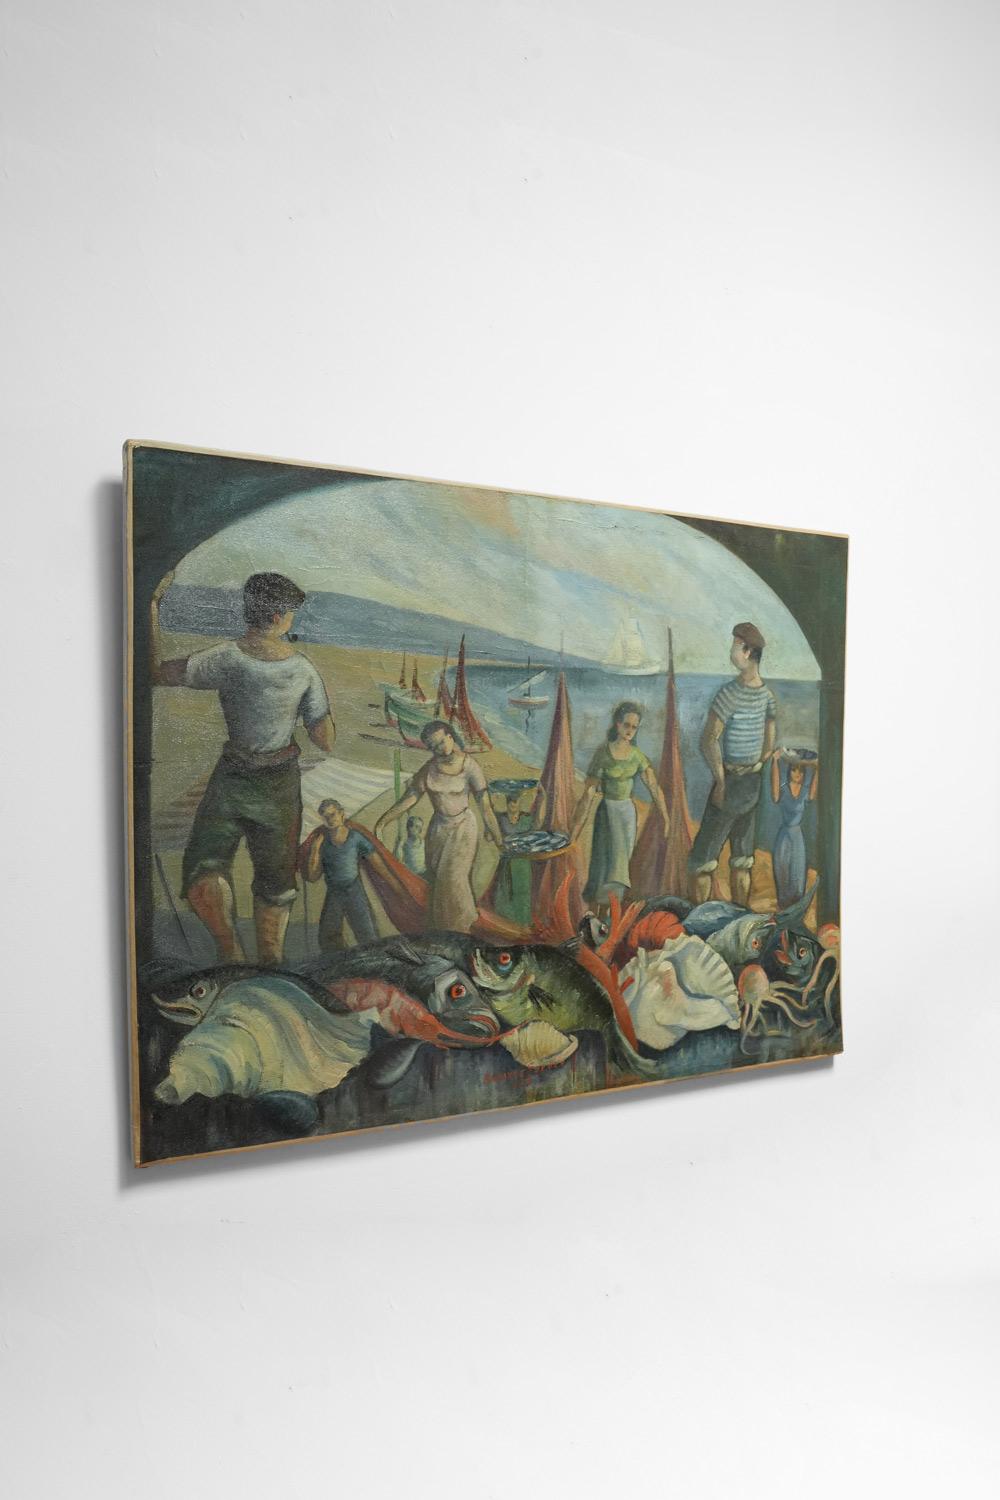 Oil on canvas representing fishermen returning from fishing and bringing fish to a table in the foreground covered with fish in the style of a still life. France, 1930s.